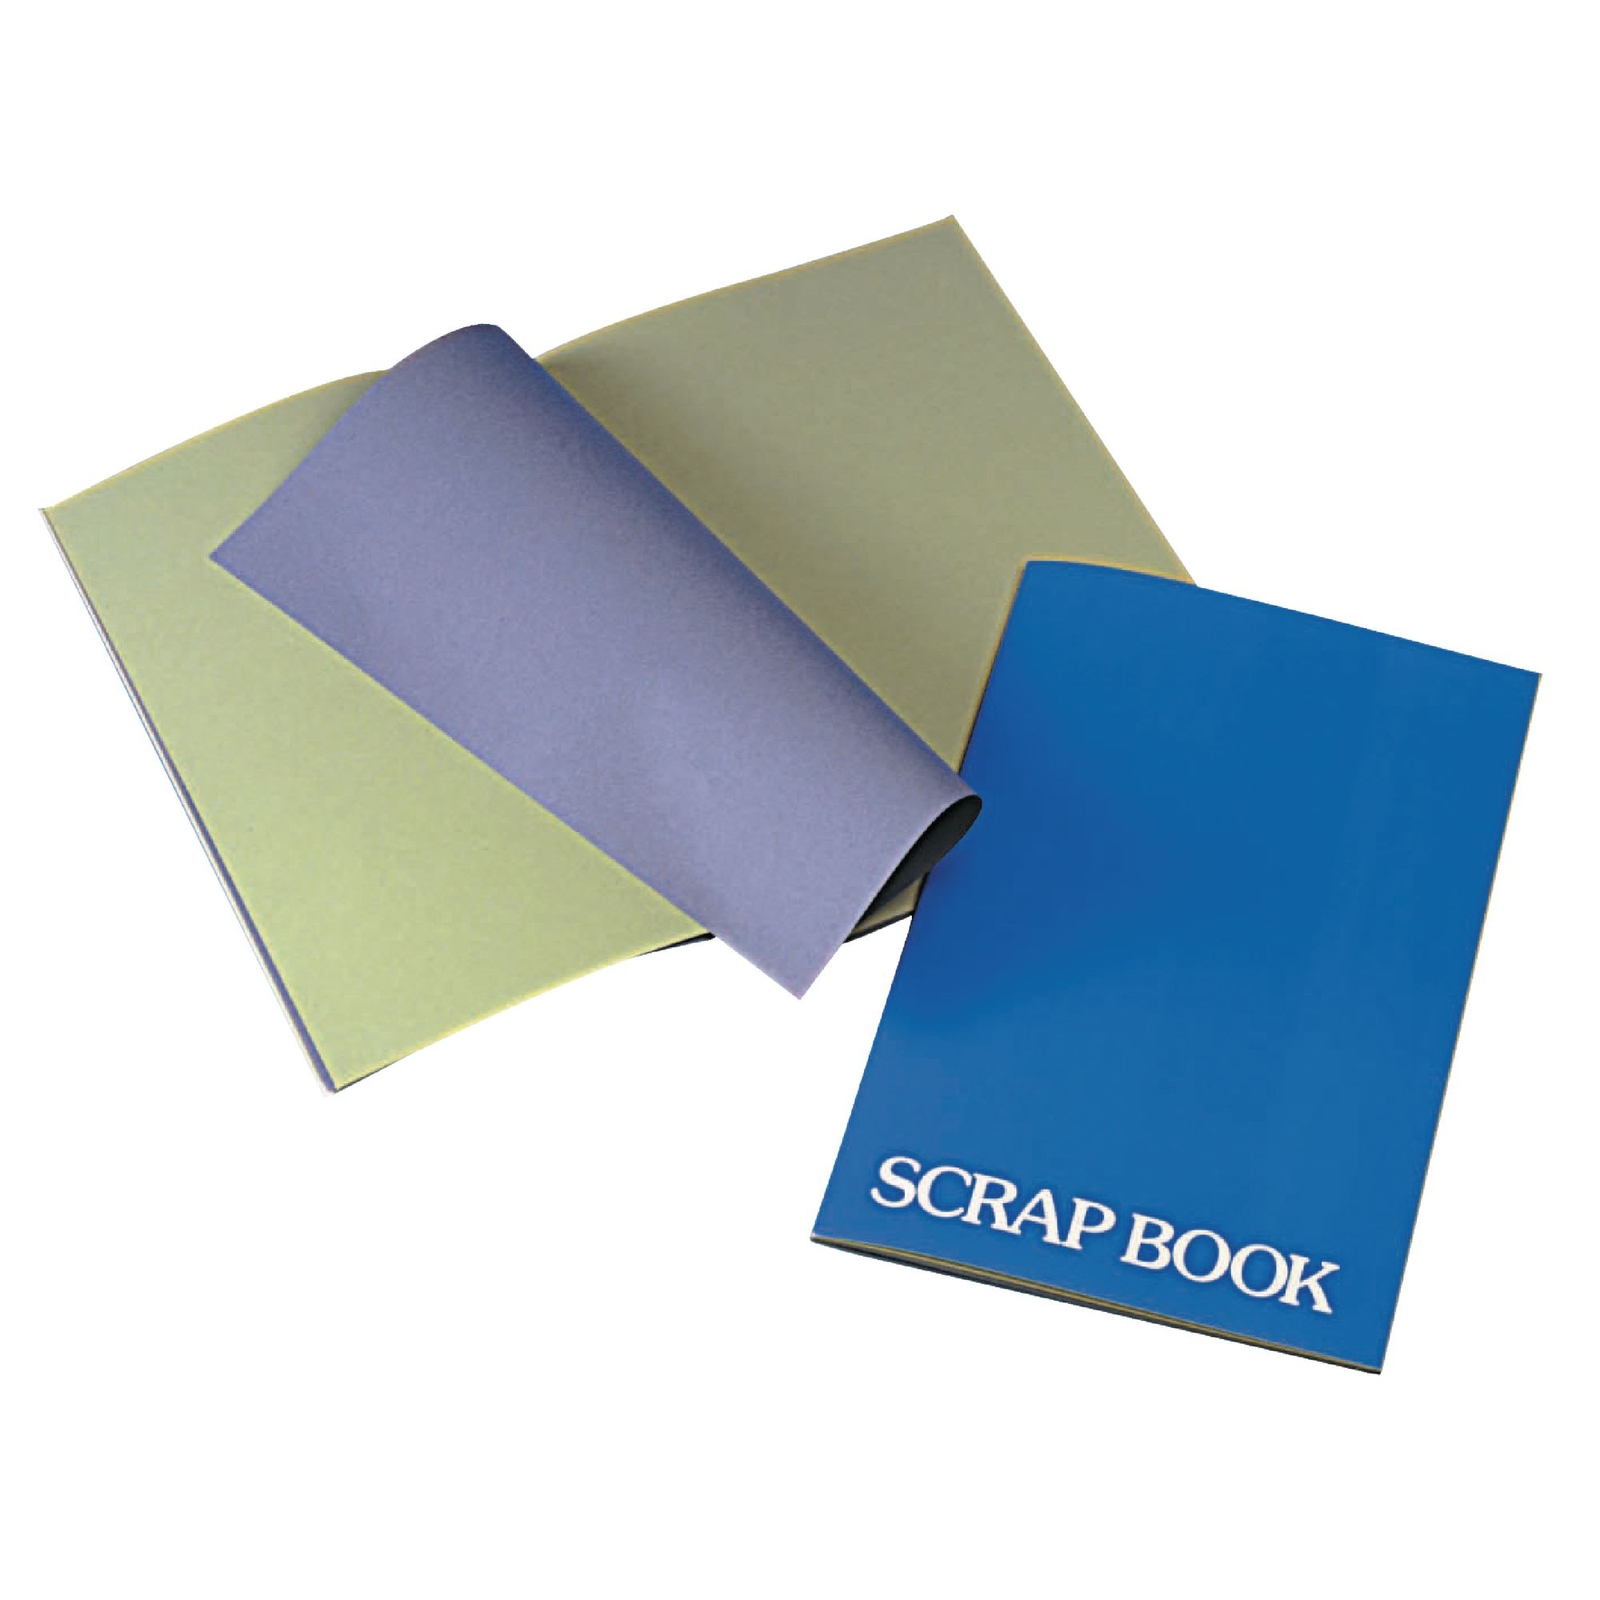 377 x 251mm Scrapbook 40-Page - Pack of 12